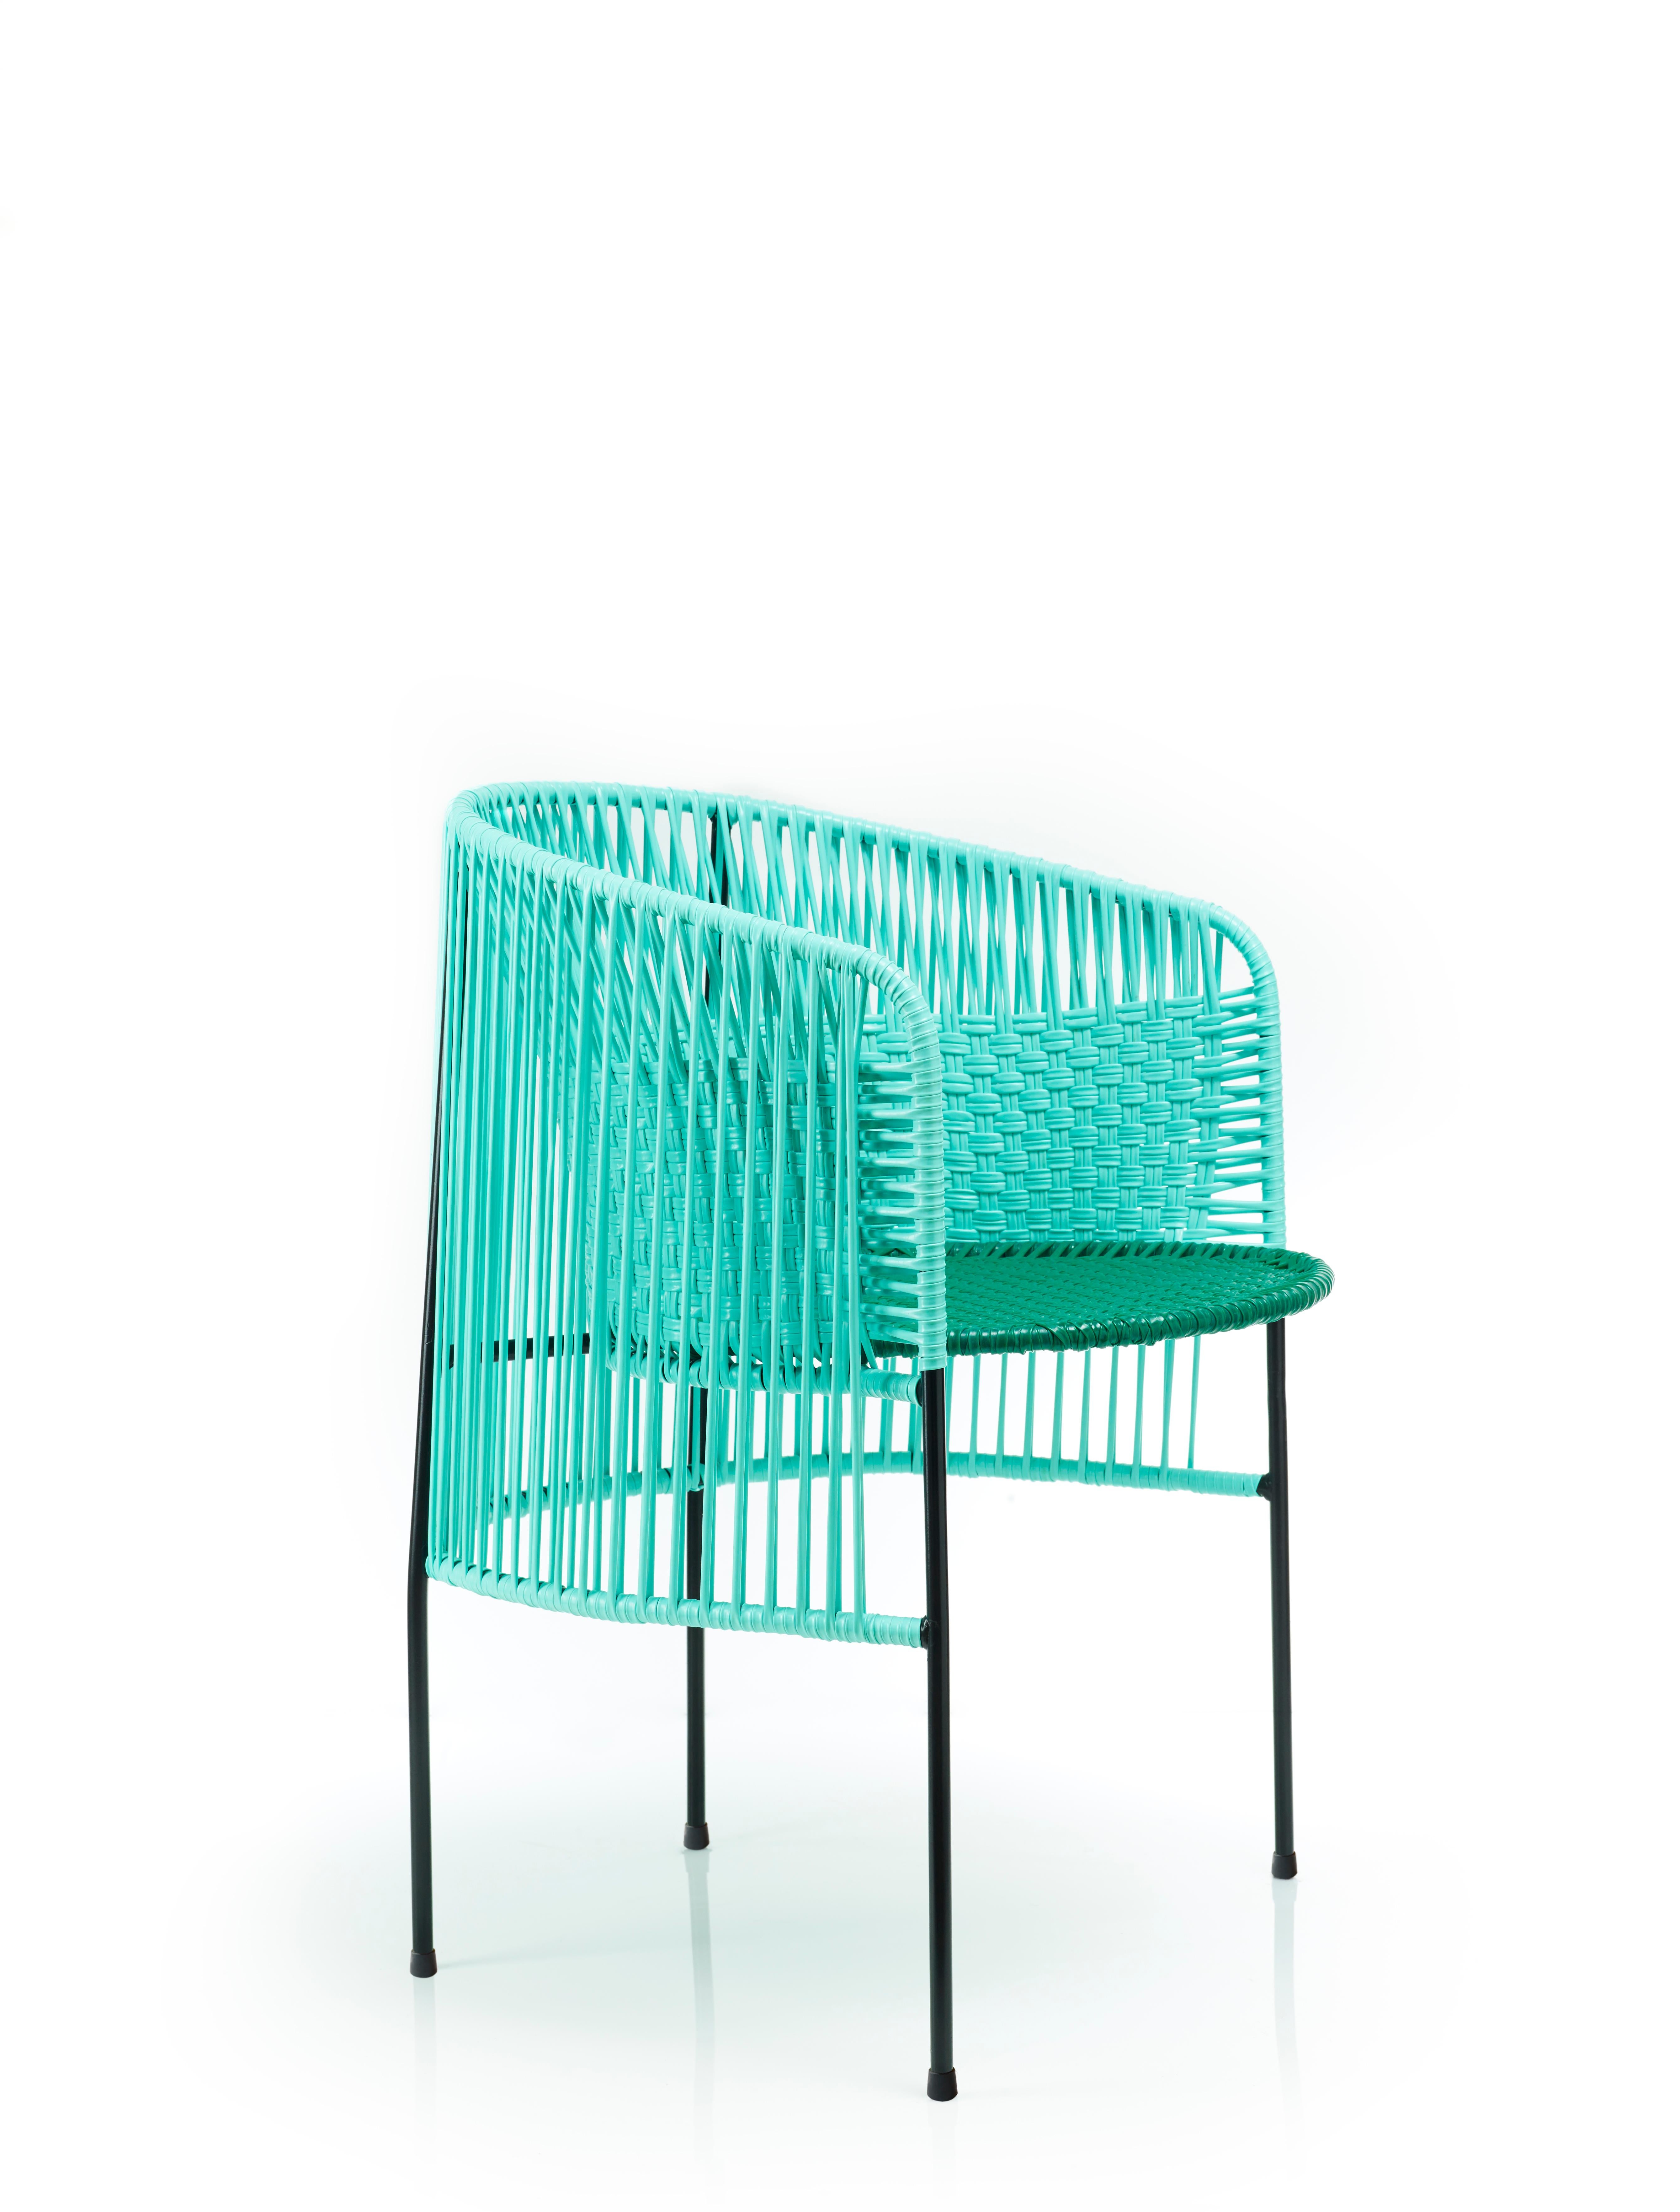 Mint caribe dining chair by Sebastian Herkner
Materials: Galvanized and powder-coated tubular steel. PVC strings are made from recycled plastic.
Technique: Made from recycled plastic and weaved by local craftspeople in Colombia. 
Dimensions: W